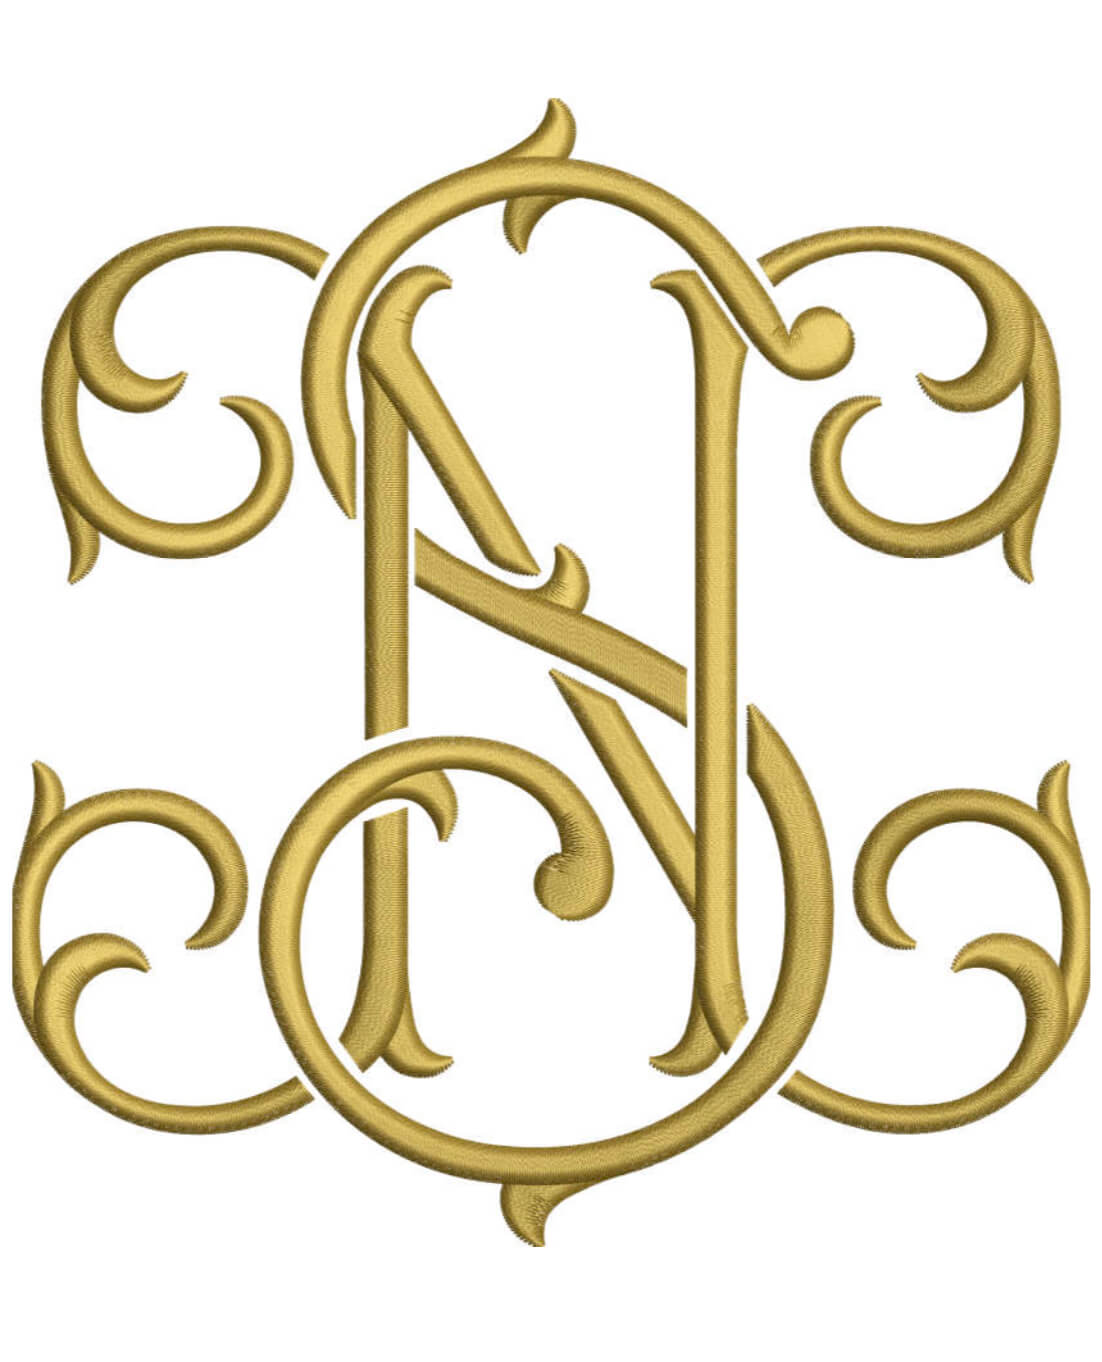 Monogram Couture NS for Embroidery